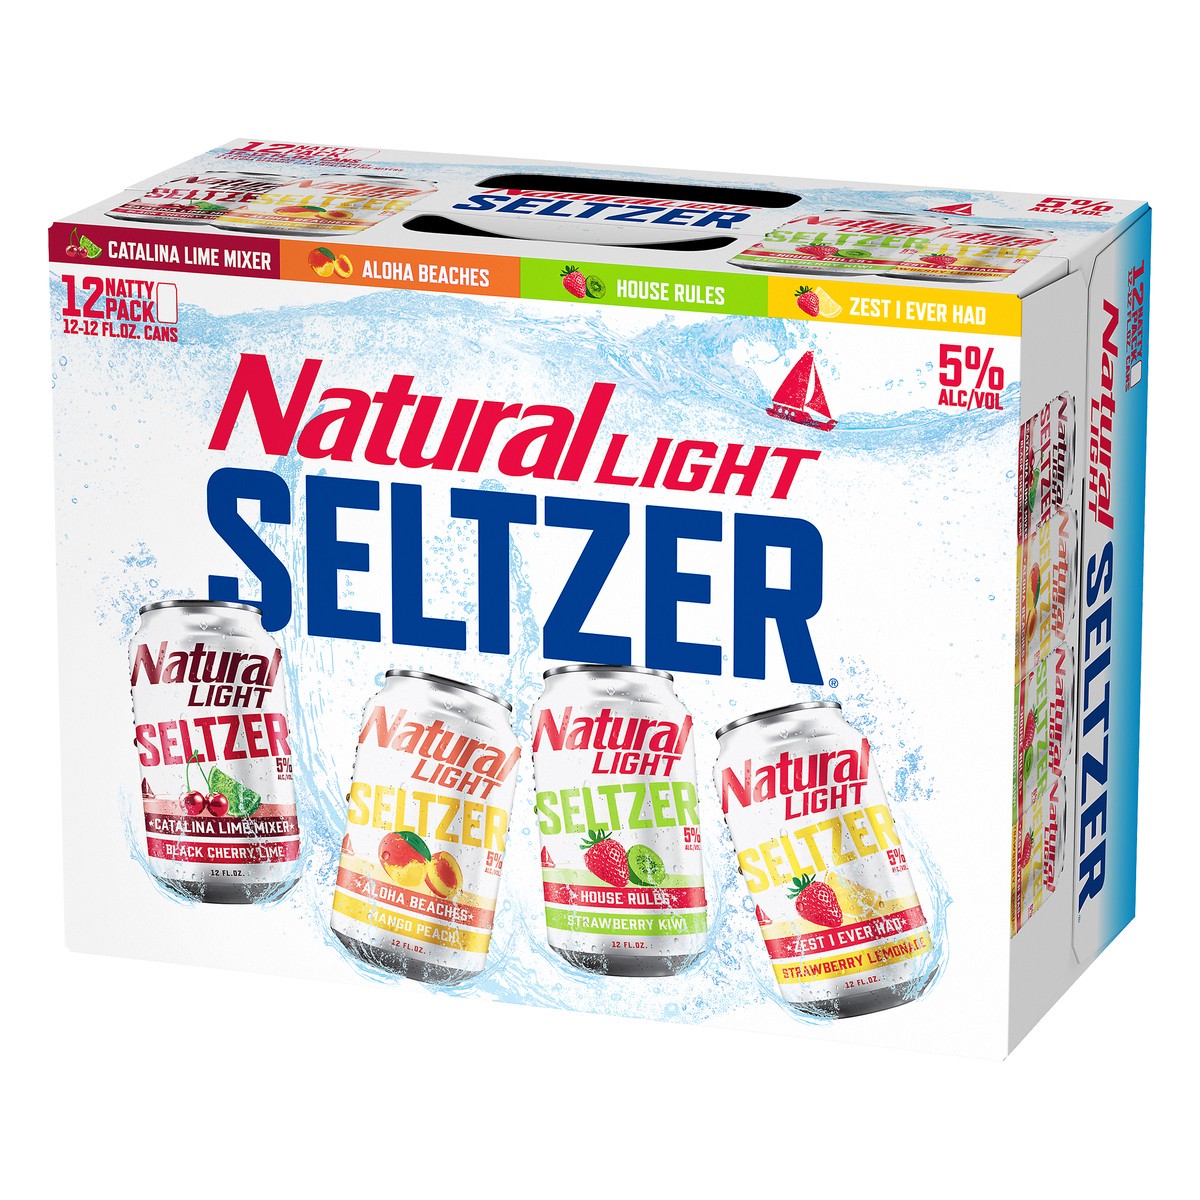 slide 7 of 8, Natural Light Hard Seltzer Variety Pack contains House Rules, Catalina Lime Mixer and Aloha Beaches hard seltzers. A refreshing blend of fruit flavors creates a light, fizzy drink. Each serving contains 133 calories and 6% ABV. 12 pack., 12 ct